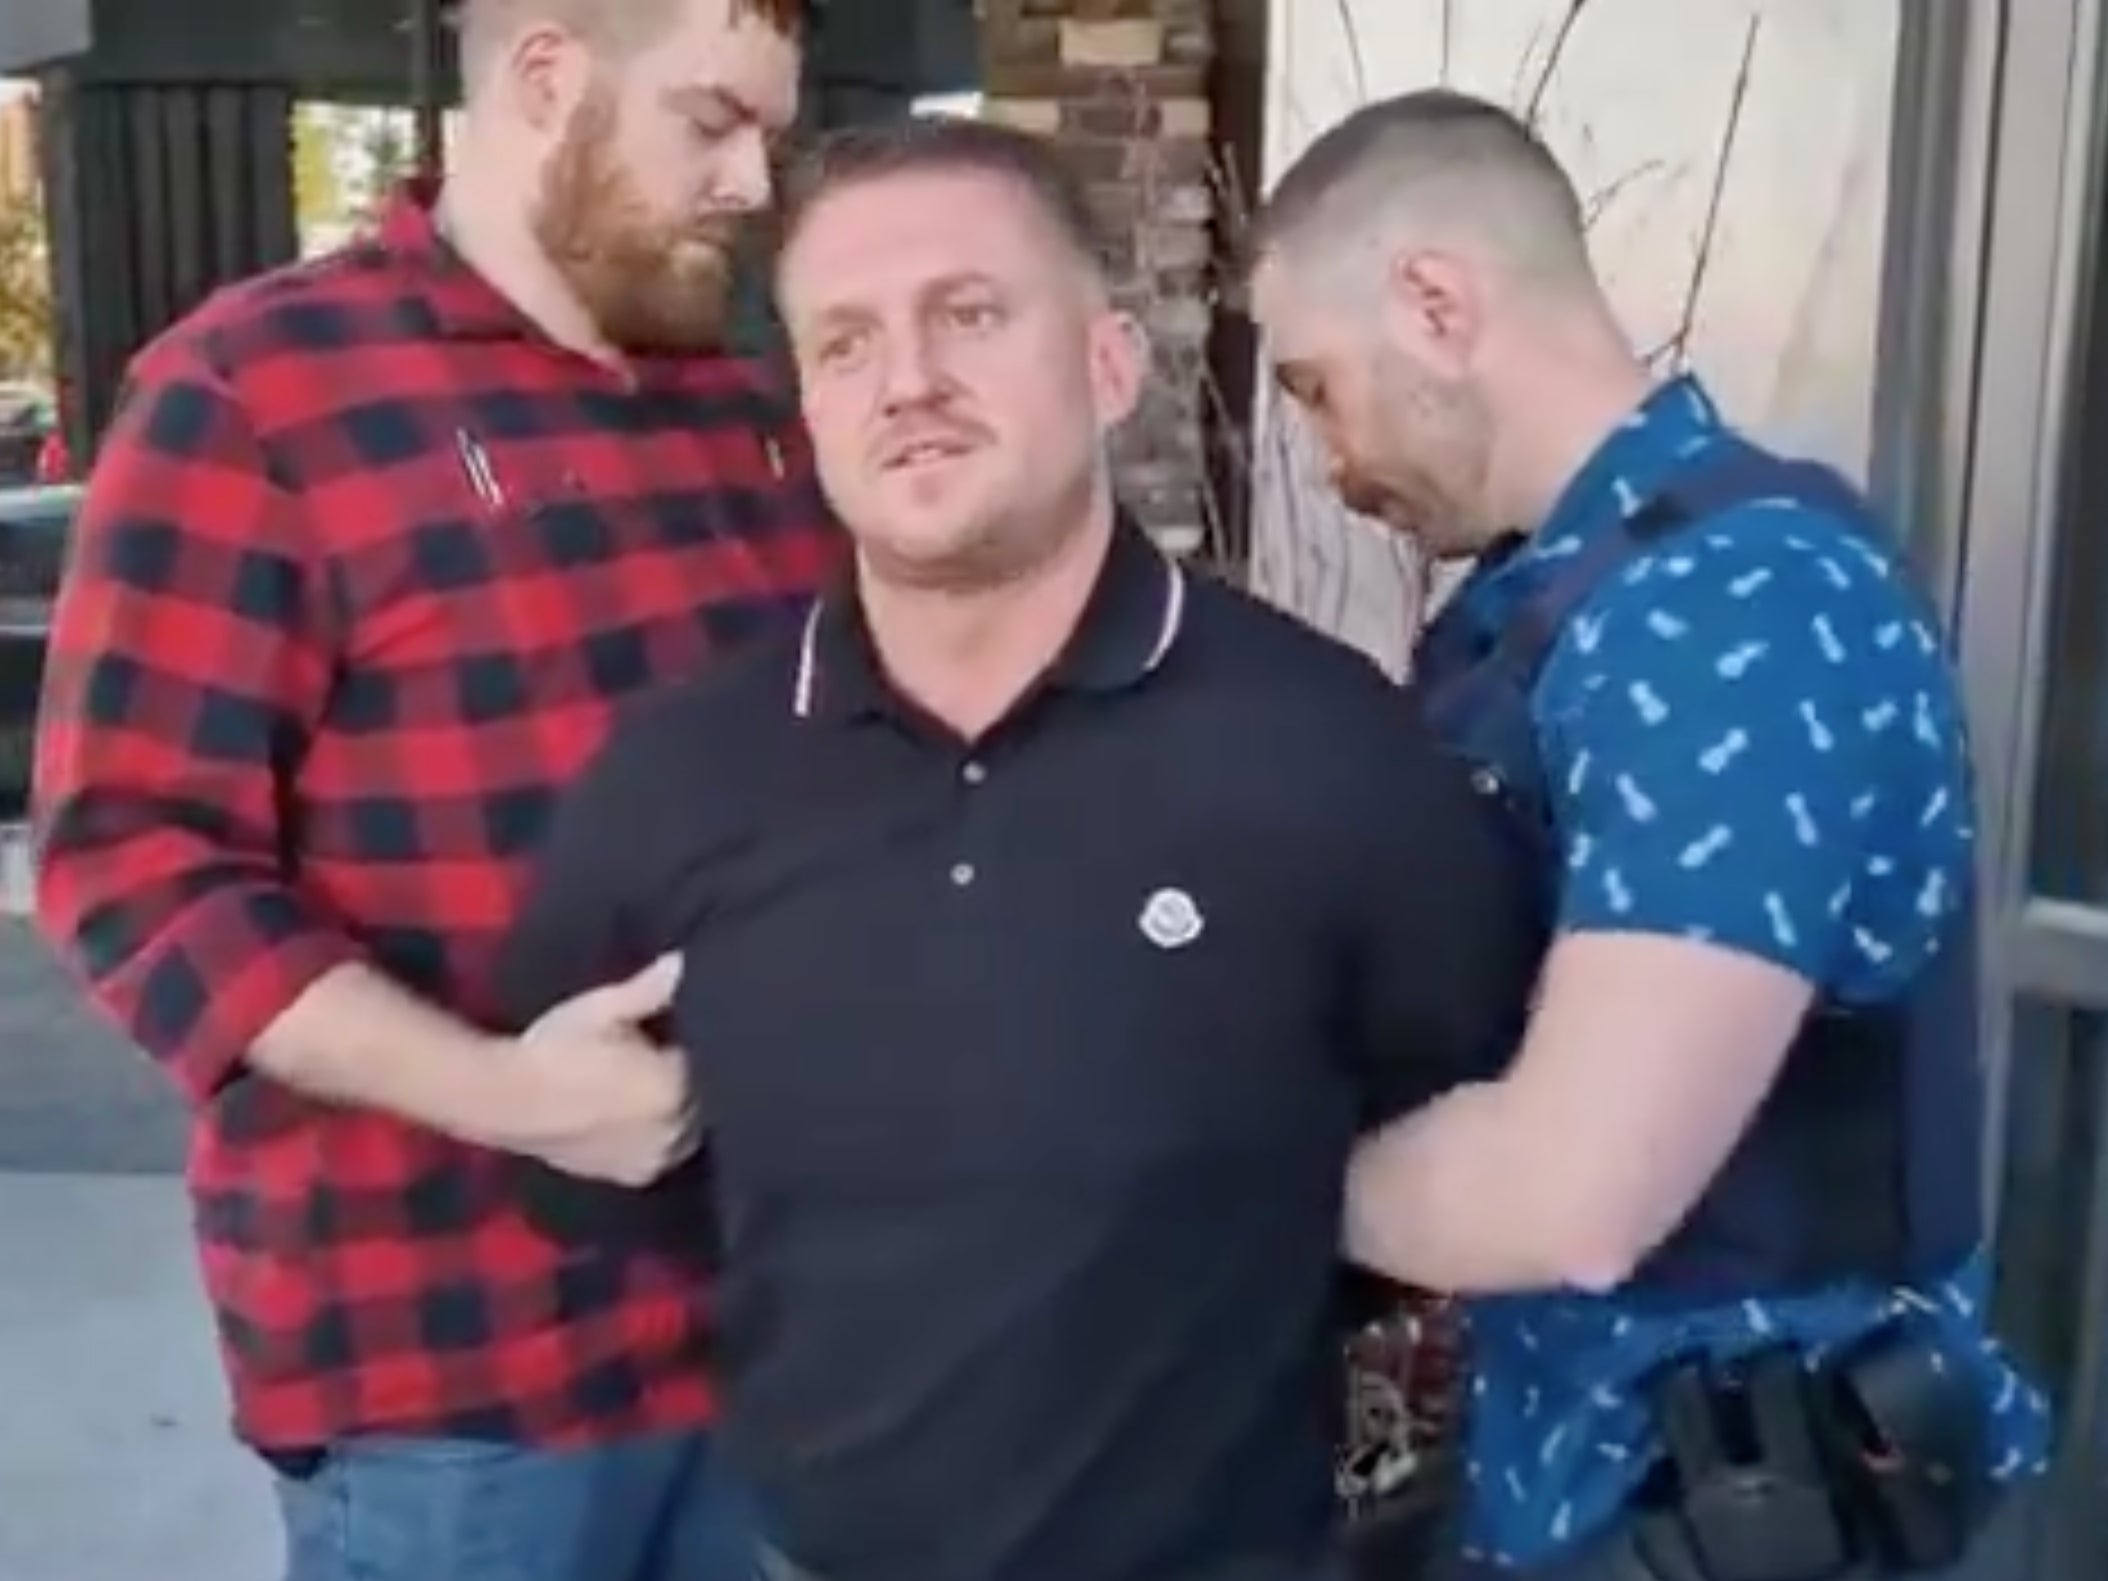 Tommy Robinson, whose real name is Stephen Yaxley Lennon, was filmed being arrested on Monday